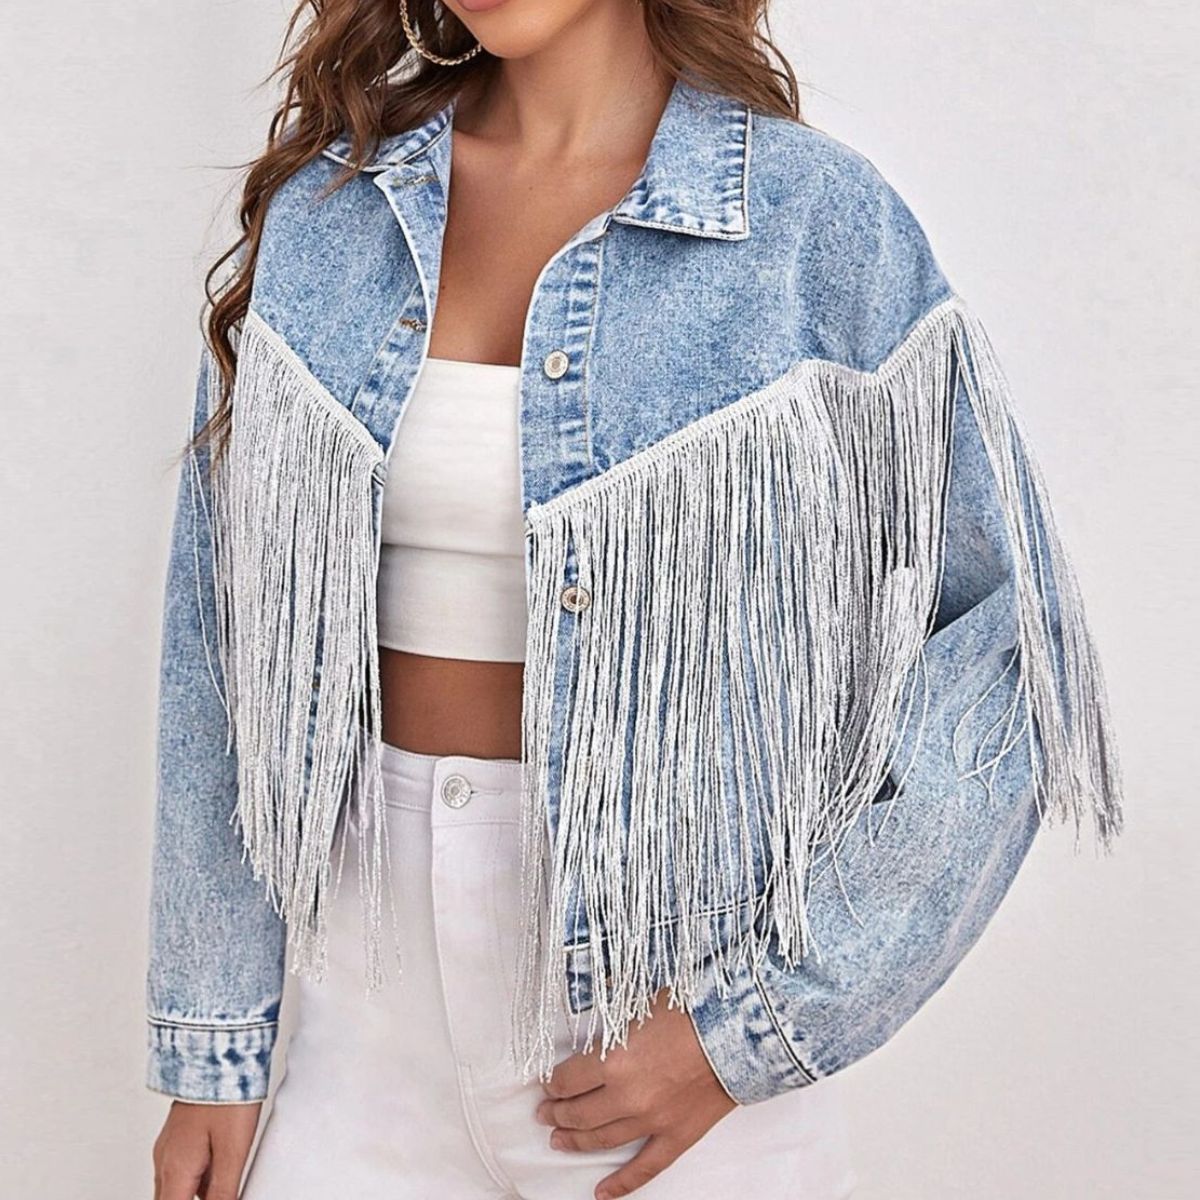 Fringe Detail Collared Neck Long Sleeve Denim Jacket - The Frosted Cowgirls